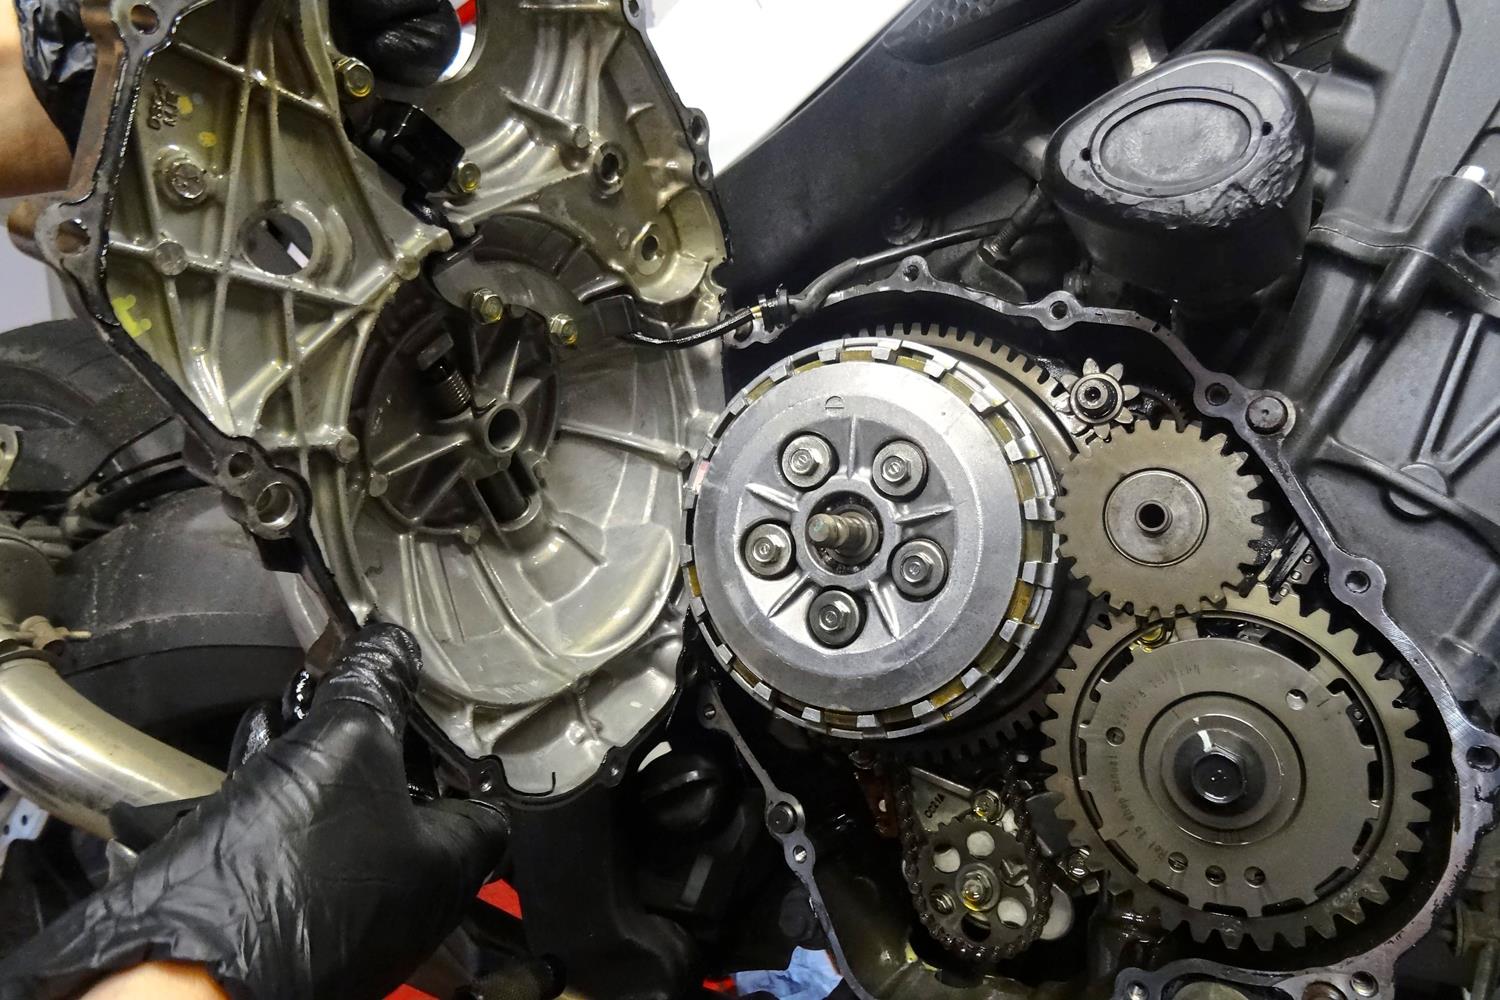 Get your bite back: How to replace your clutch | MCN